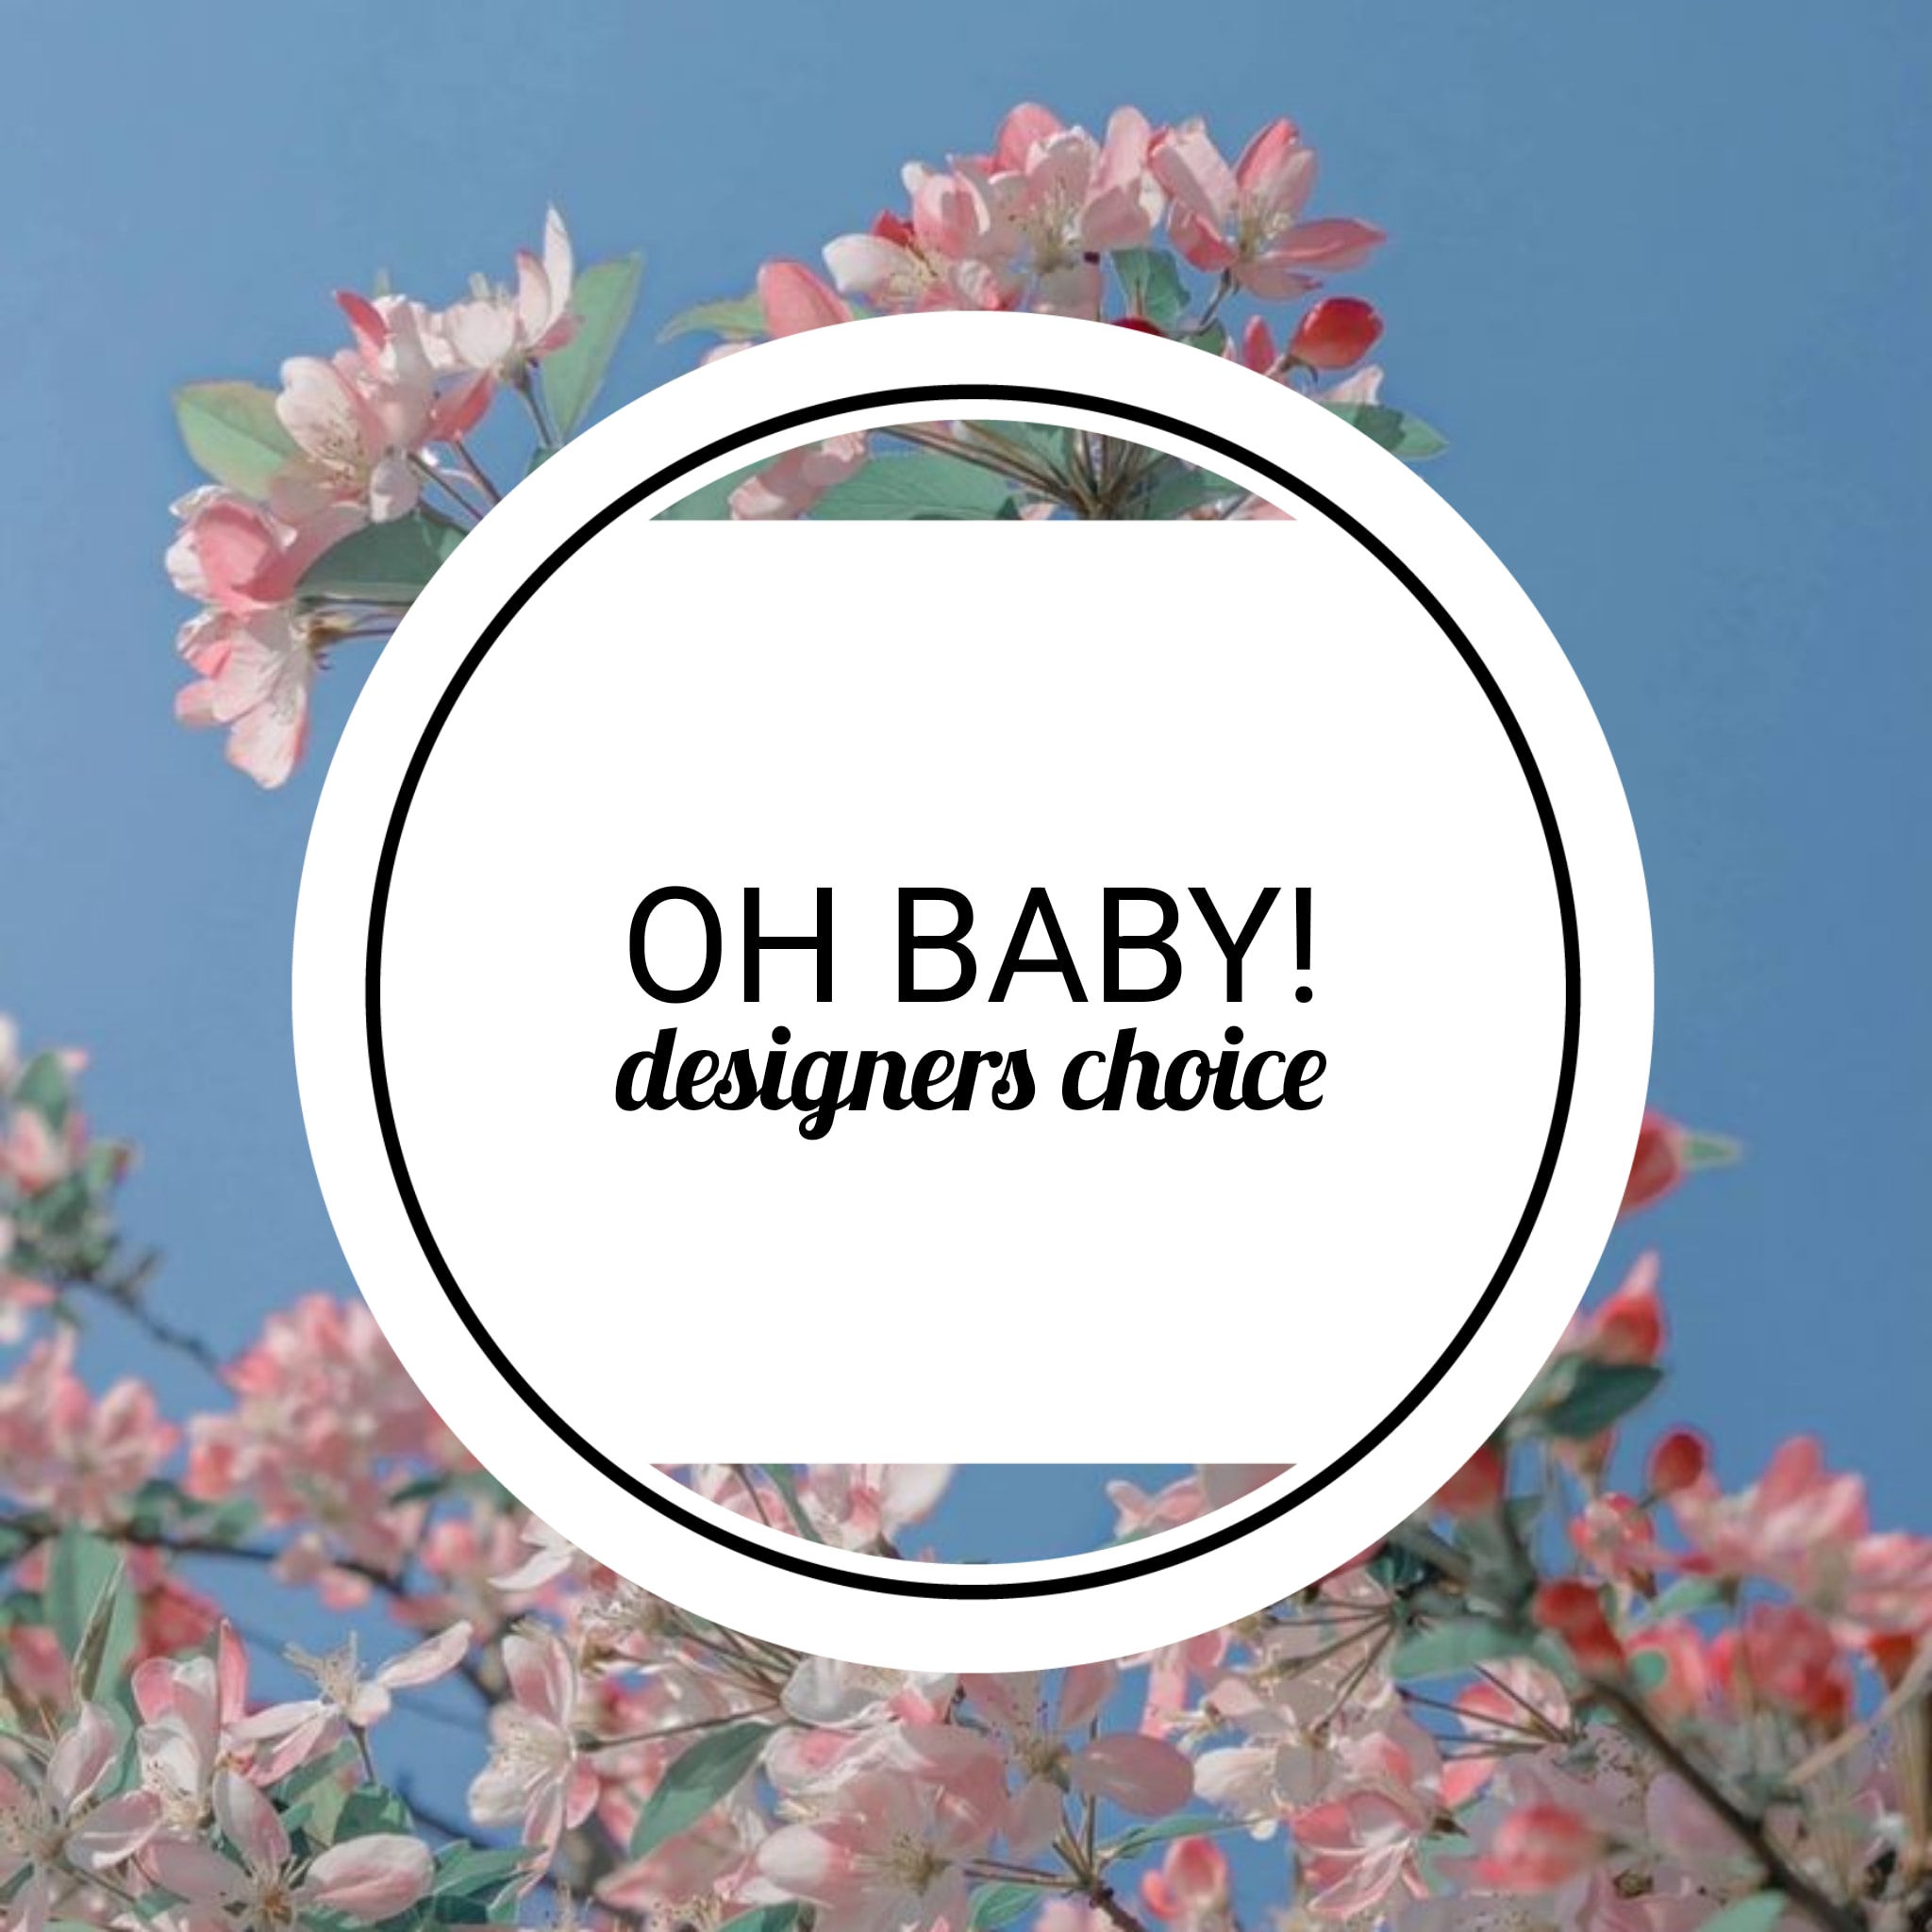 Oh Baby! Designers Choice - Celebrate the new arrival and congratulate the new mom with a beautiful, custom, one of a kind arrangement! Please specify gender in the special instructions when placing your order!